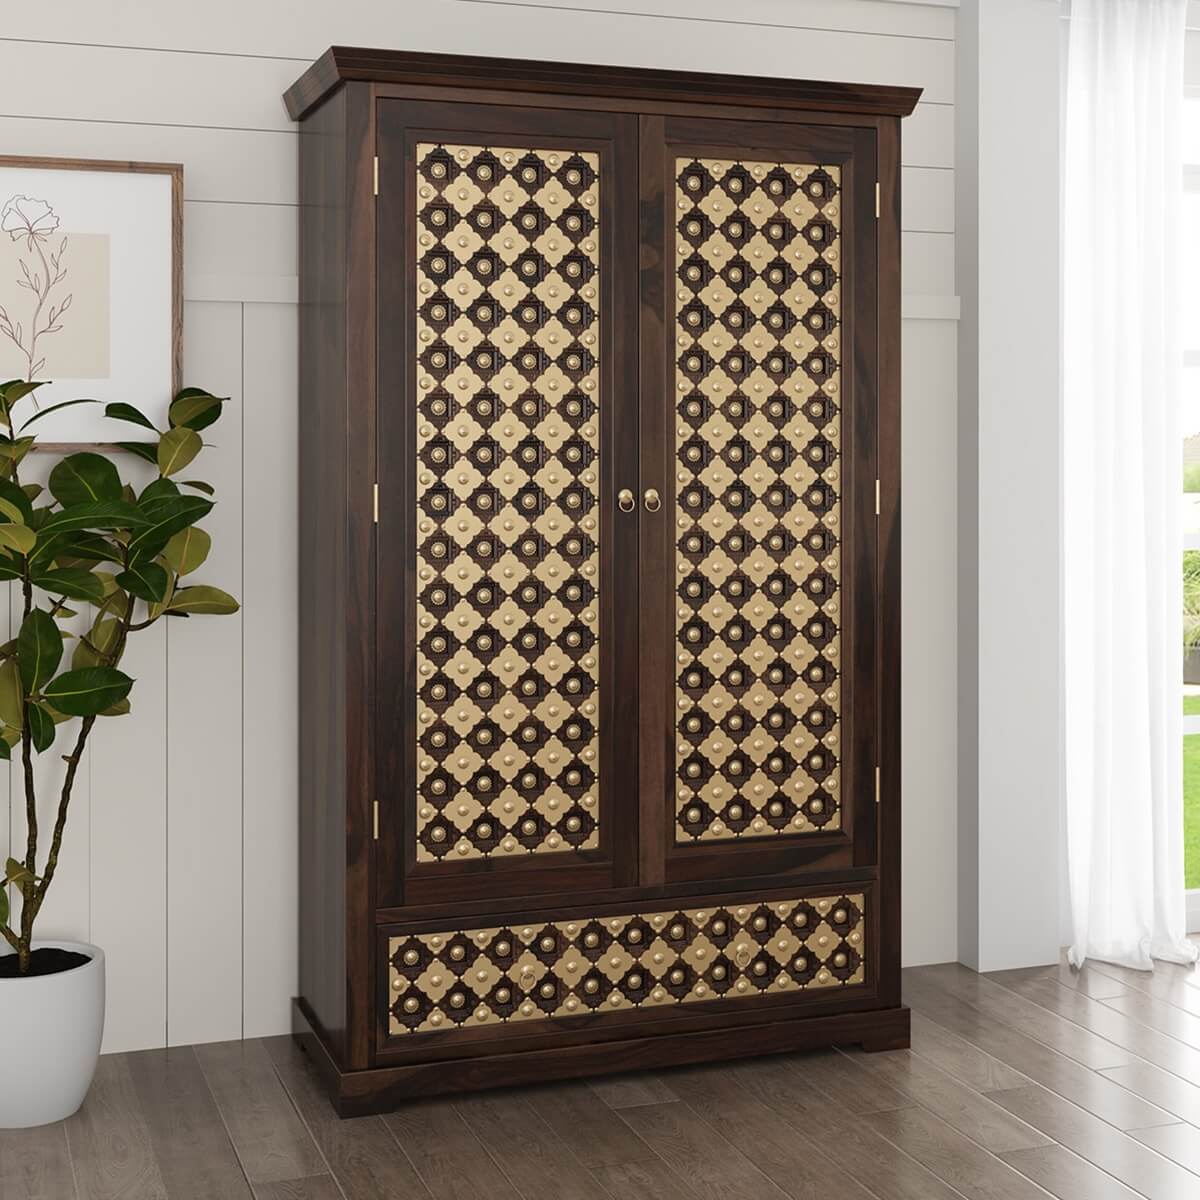 Morna Solid Teak Wood Clothing Armoire Wardrobe with Removal Shelves.